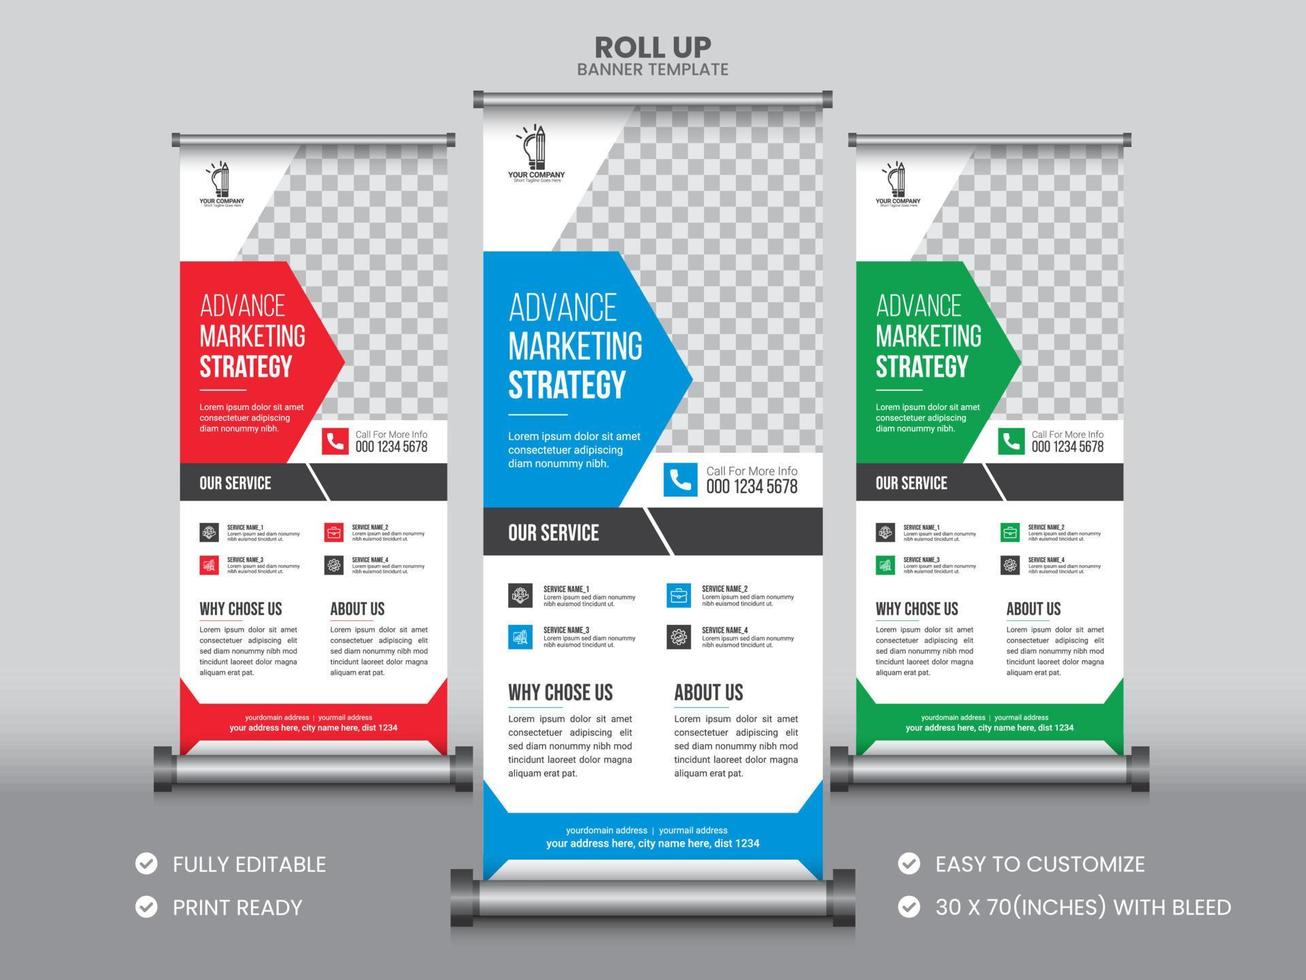 Roll up banner design template for your Business and marketing. Modern x-banner template. Corporate roll up banner design vector